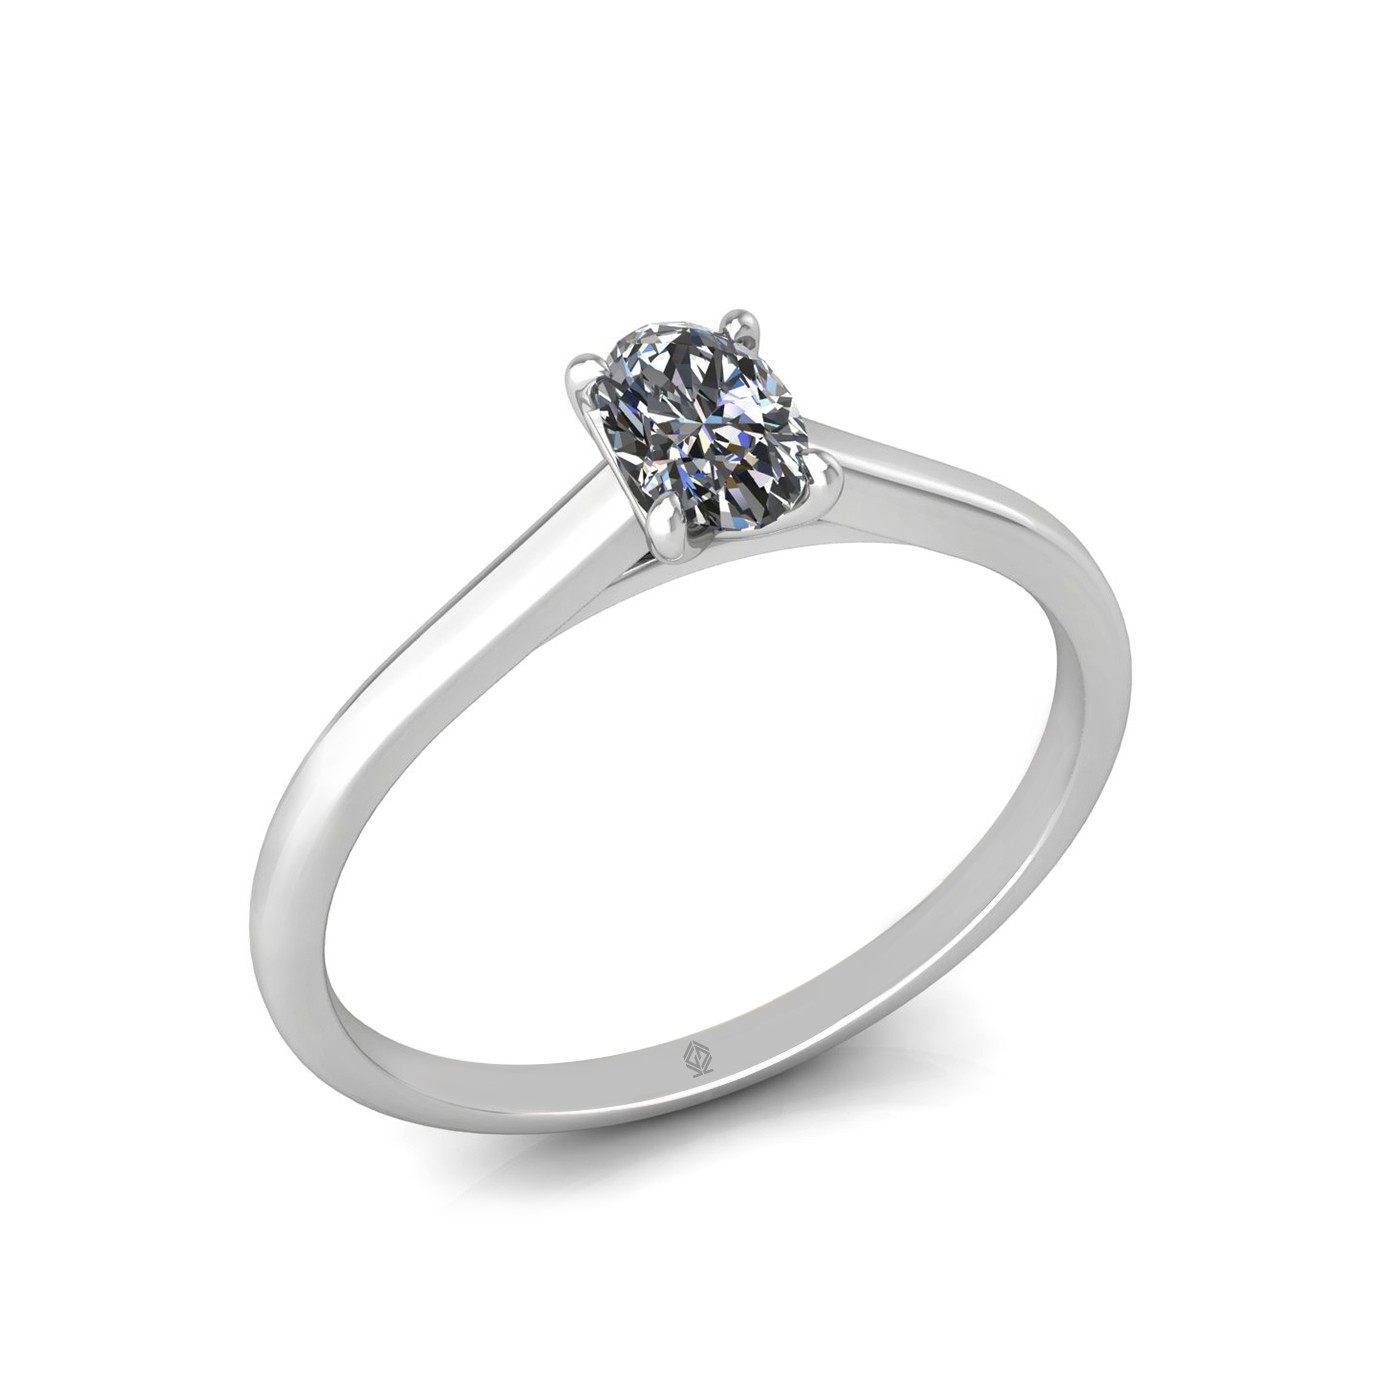 18k white gold  0,30 ct 4 prongs solitaire oval cut diamond engagement ring with whisper thin band